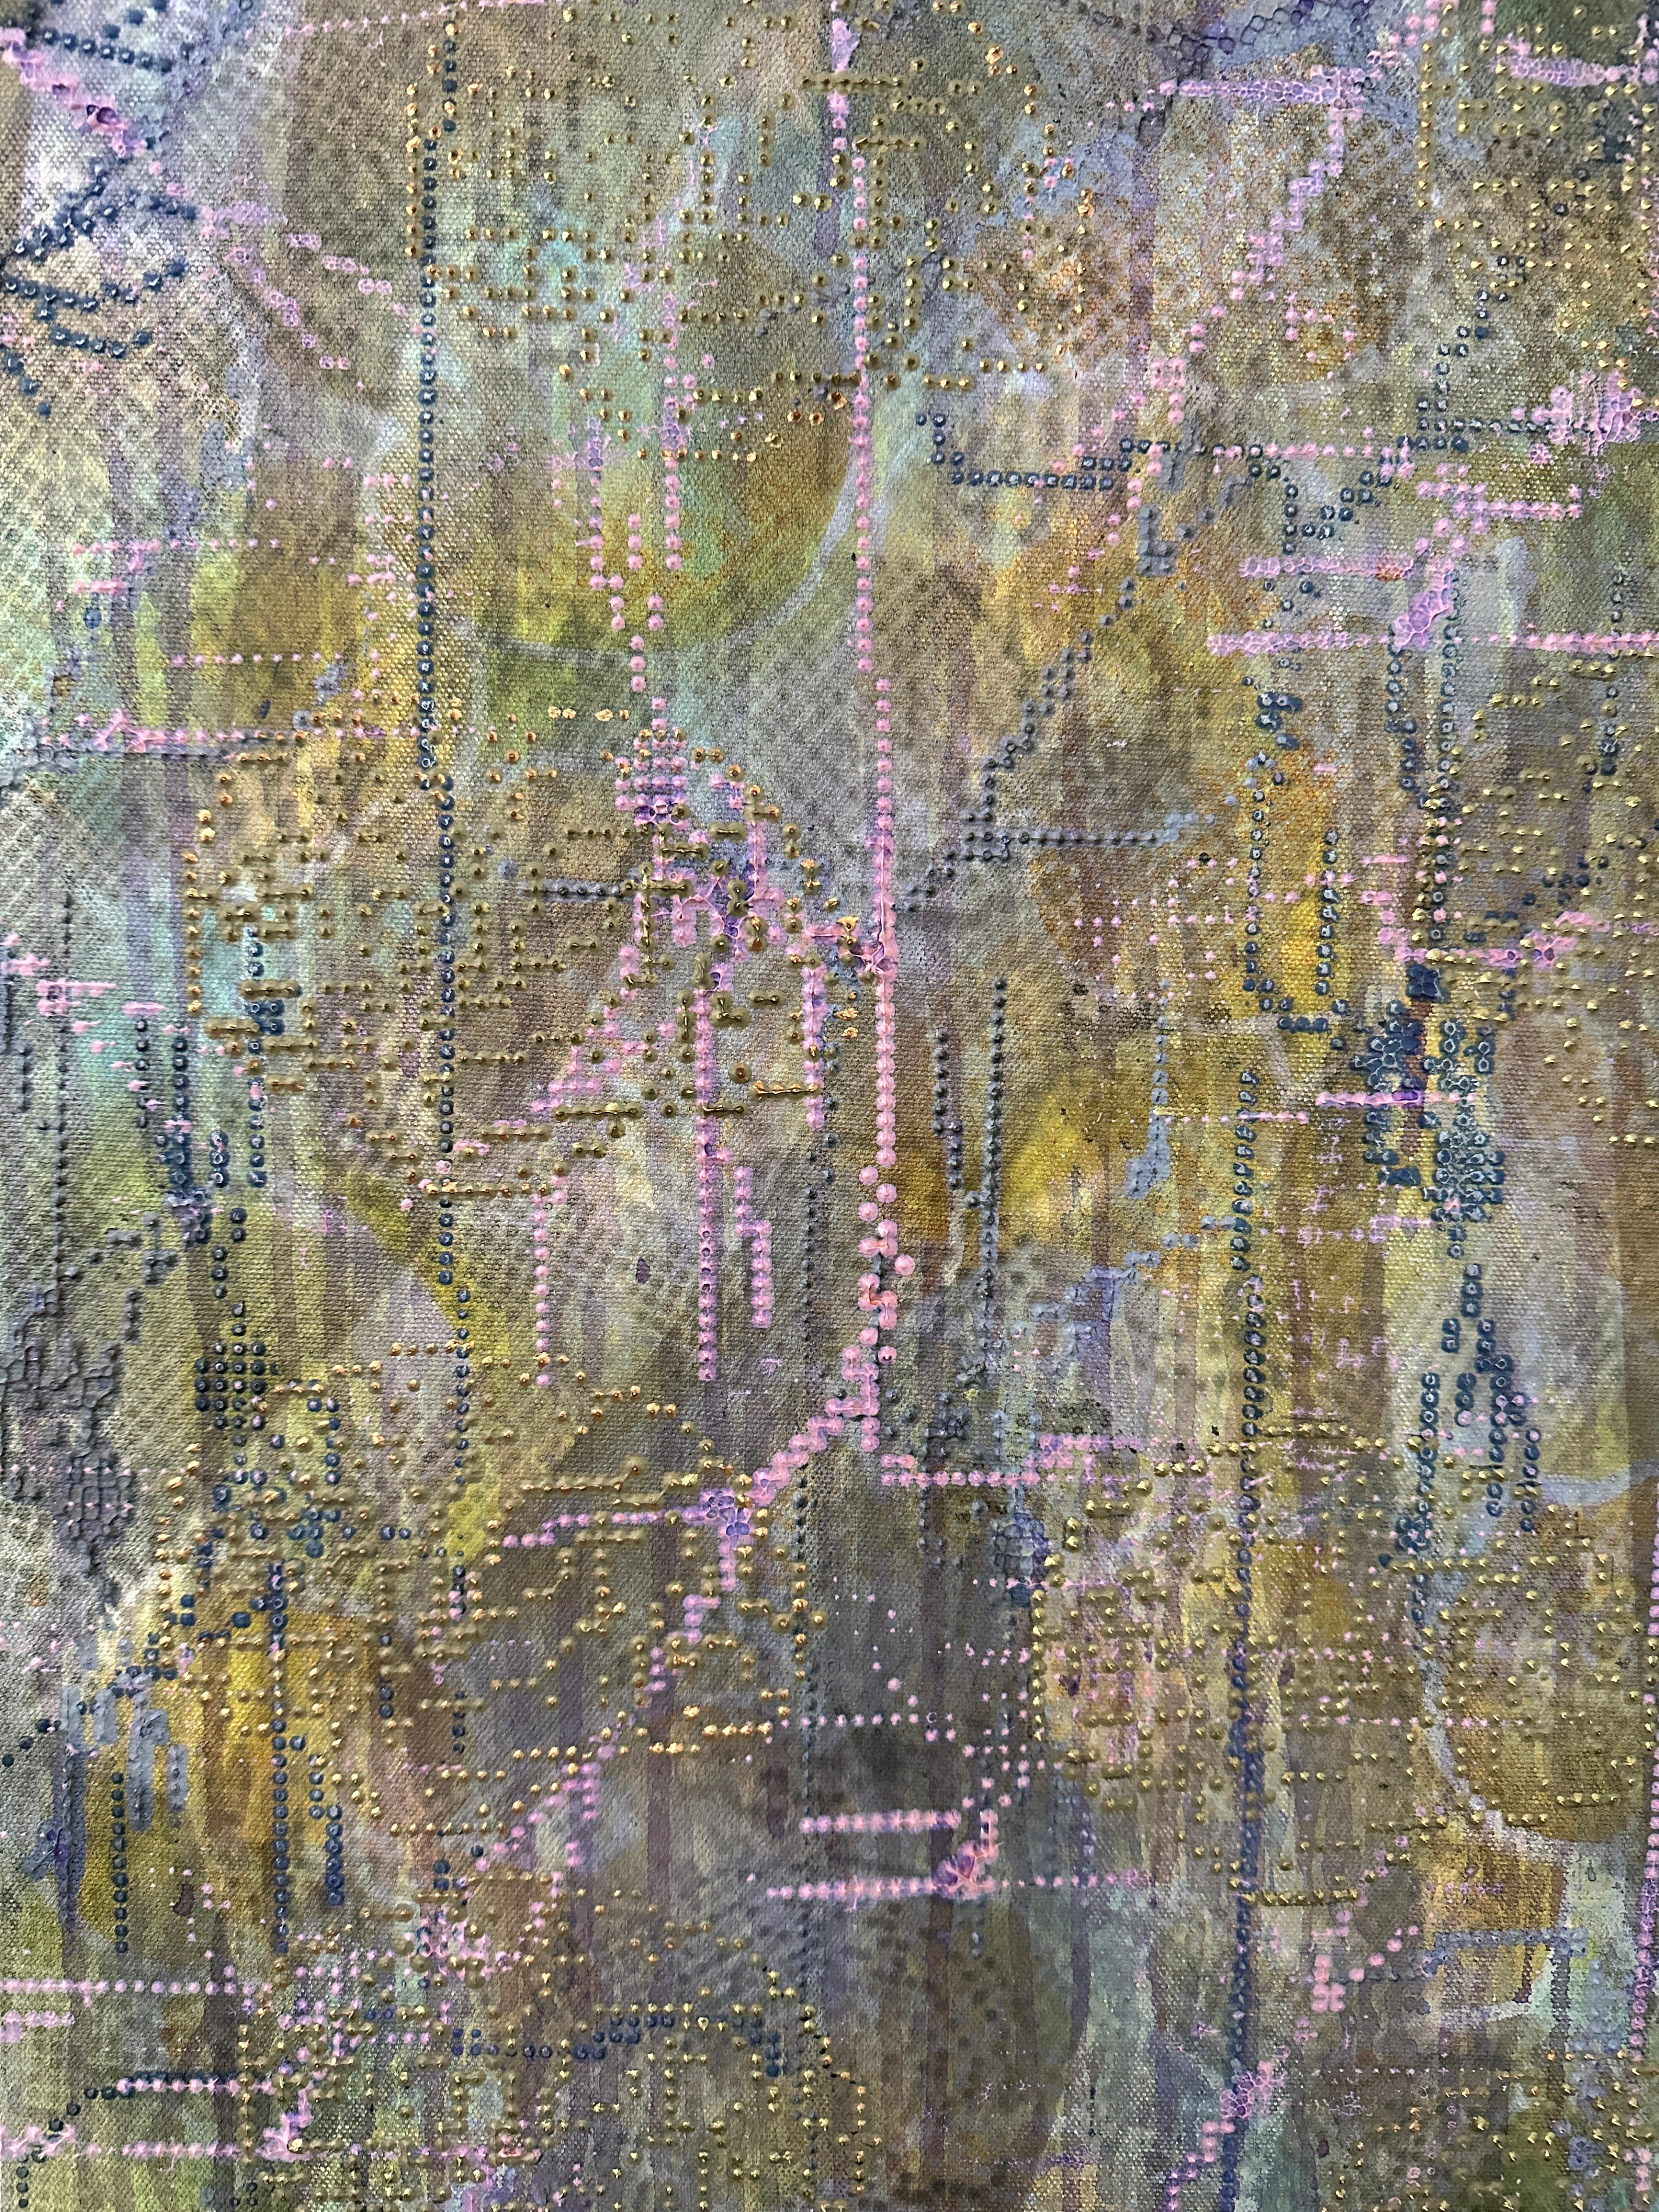 NEEDLEPOINT NEUROLOGY, patterned, pastel, earthtones, texture - Contemporary Painting by Barbara Strasen